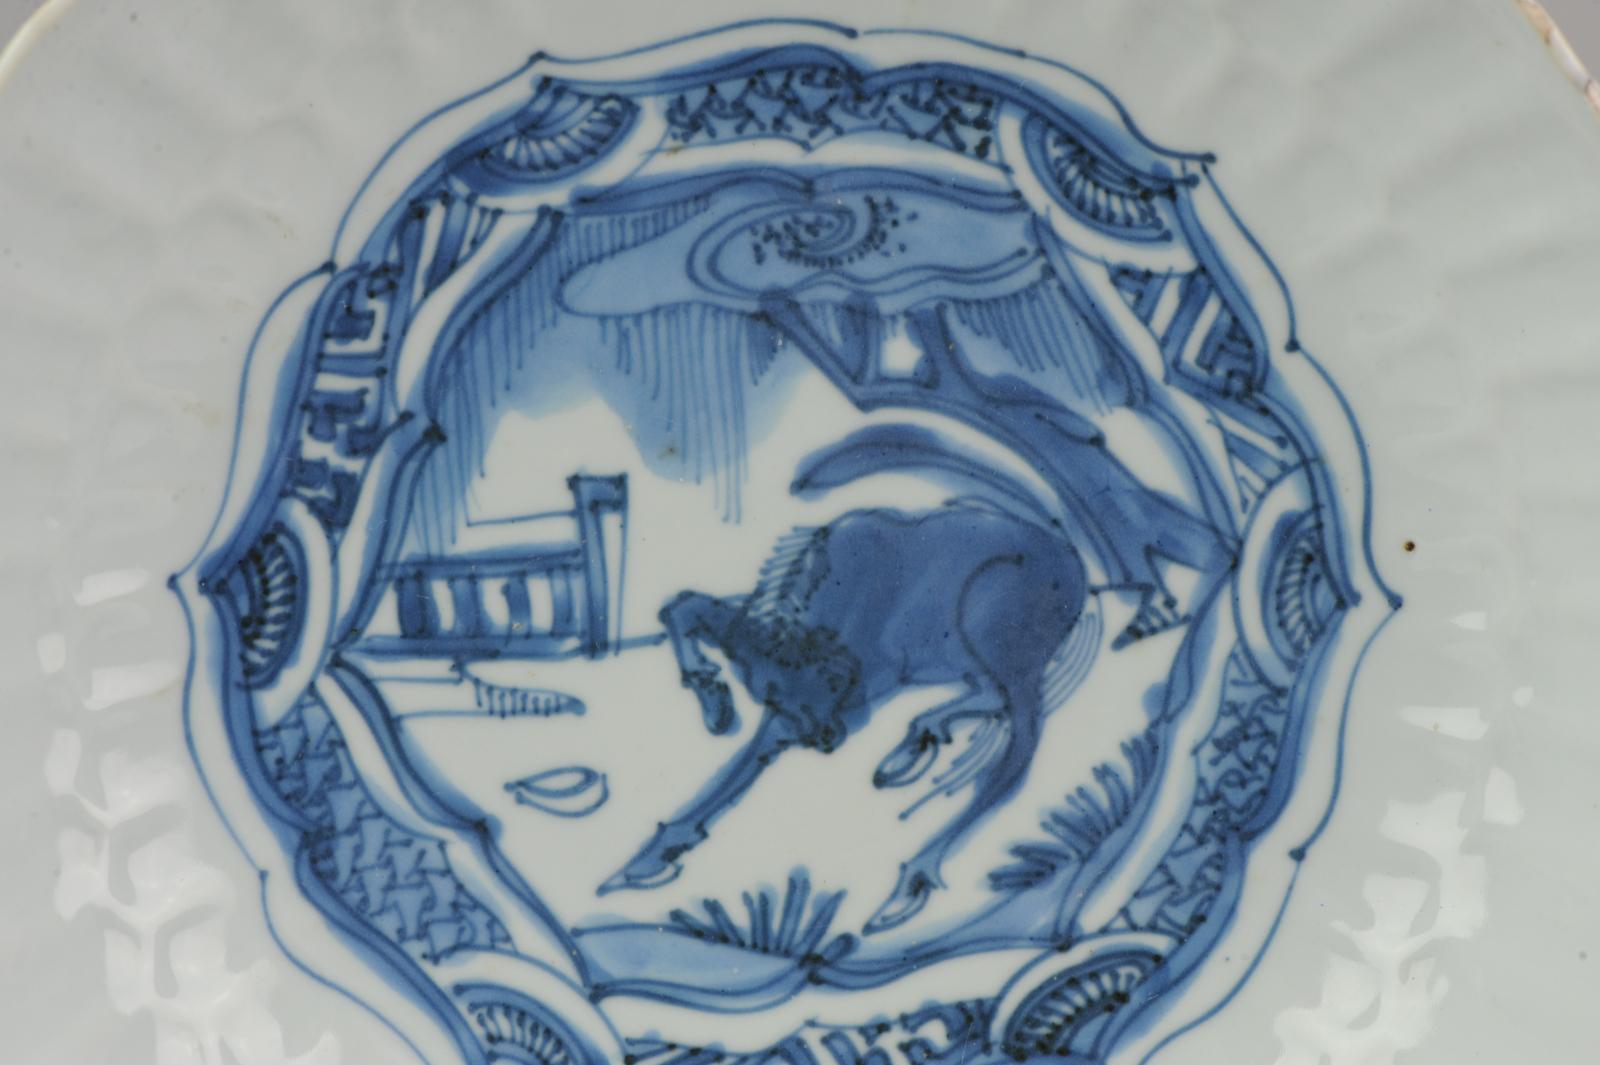 A very nicely decorated plate with a horse in a landscape or garden scene (you see a part of a fence to the left). The scene is overlapped by typical Kraak diaper panels.

With a nice moulded double chrysanthemum rim.

Wanli, Tianqi or Chongzhen